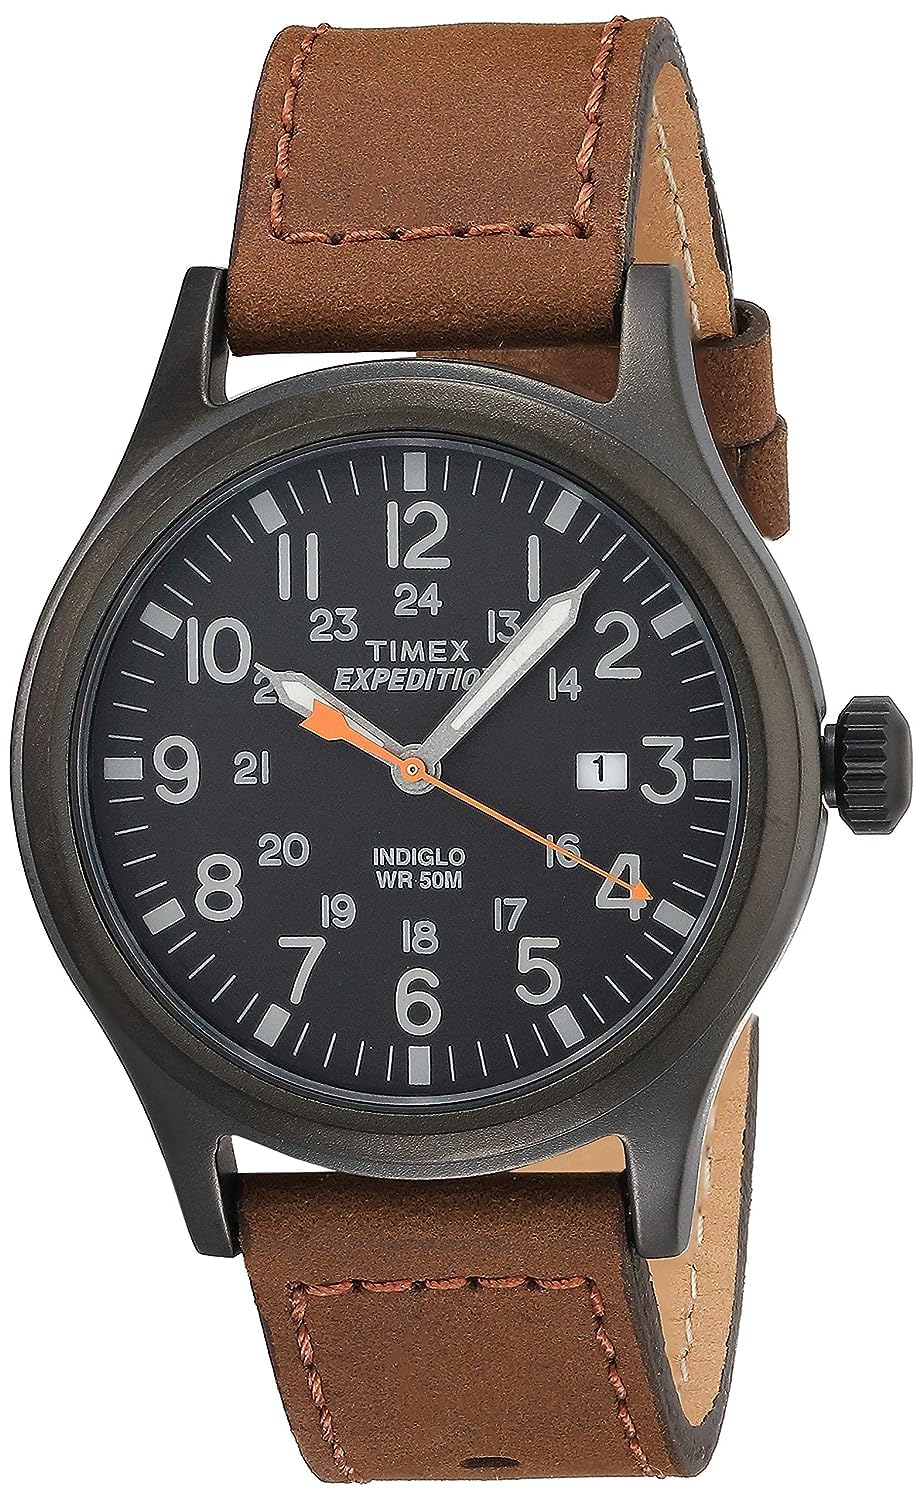 Amazon.com: Timex Men's Expedition Scout 40mm Watch – Black Case Black Dial with Brown Leather Strap : Clothing, Shoes & Jewelry $31